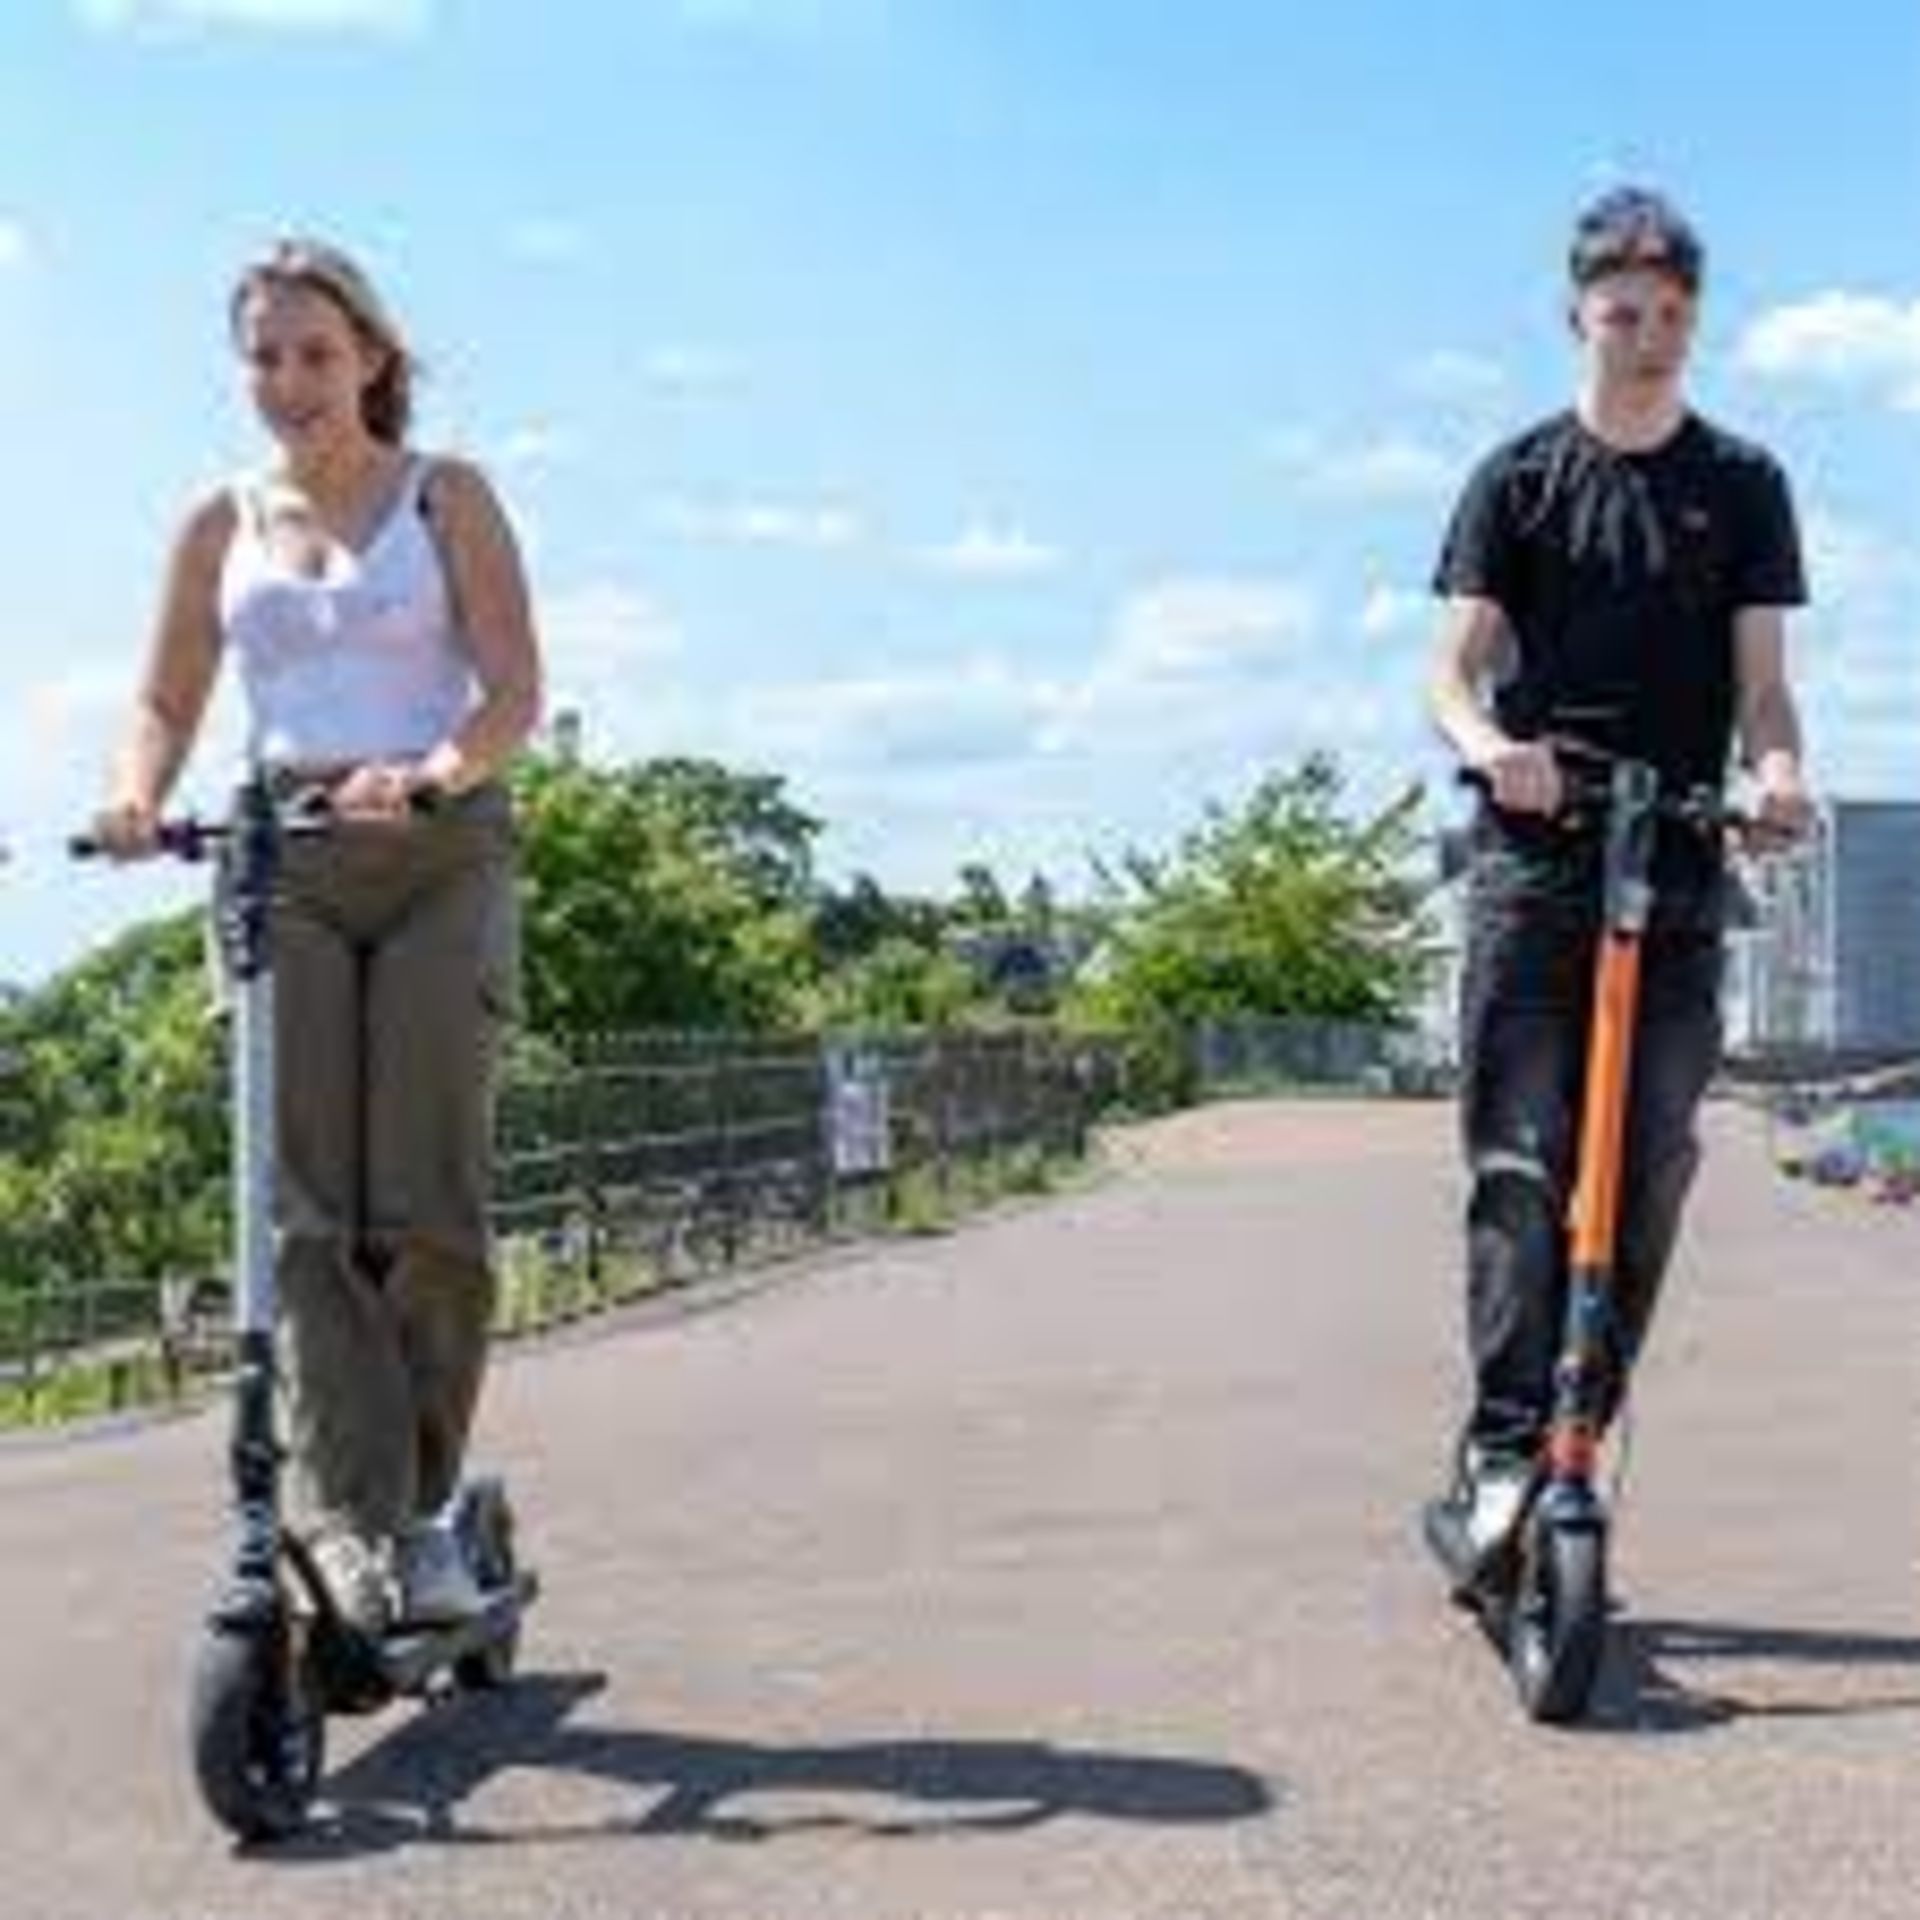 Trade Lot 4 x Brand New E-Glide V2 Electric Scooter Grey and Black RRP £599, Introducing a sleek and - Image 3 of 3